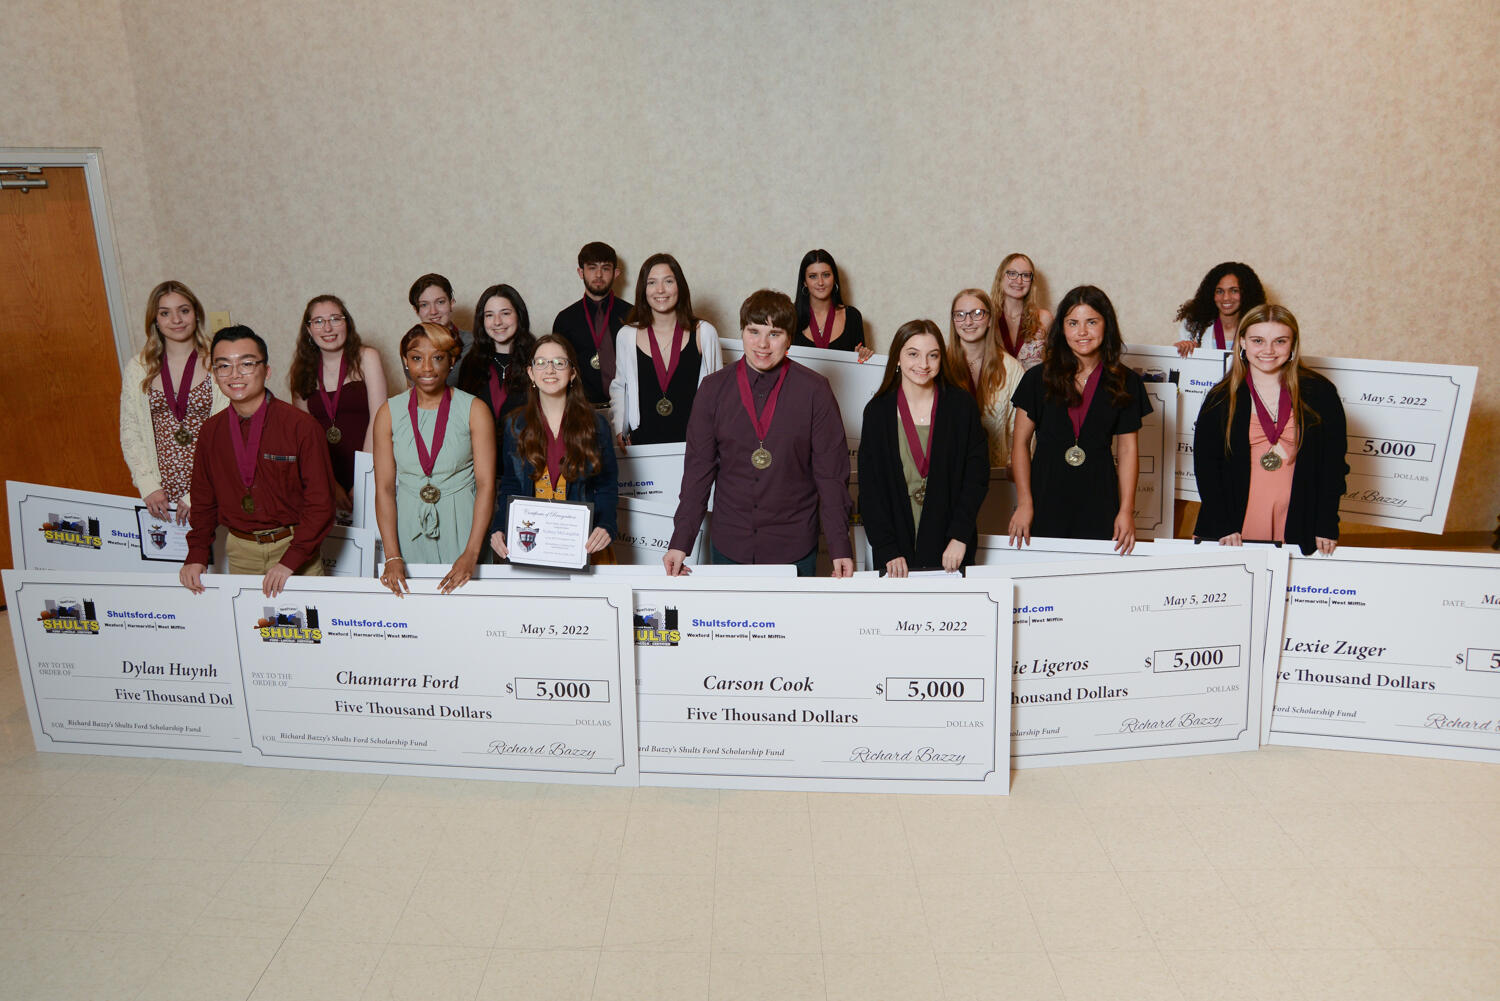 18 scholarships were handed out to students from Steel Valley alumna Richard Bazzy